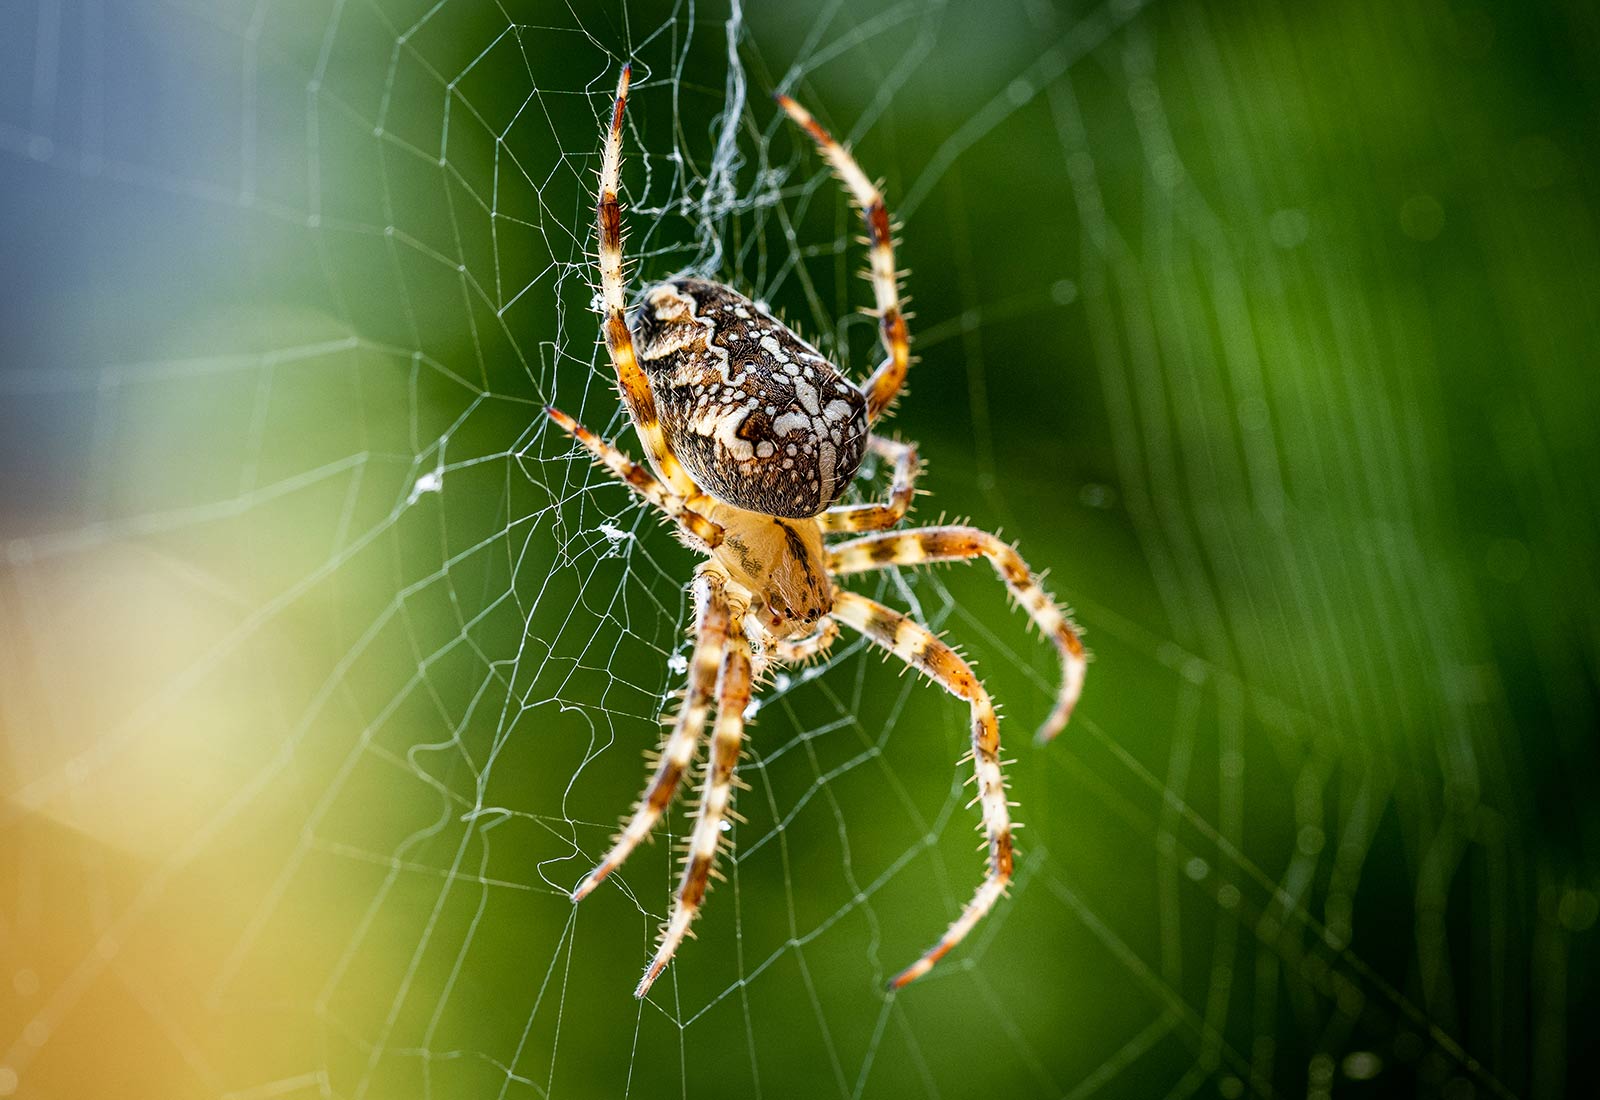 Identify Common Spiders in Your Home and Yard